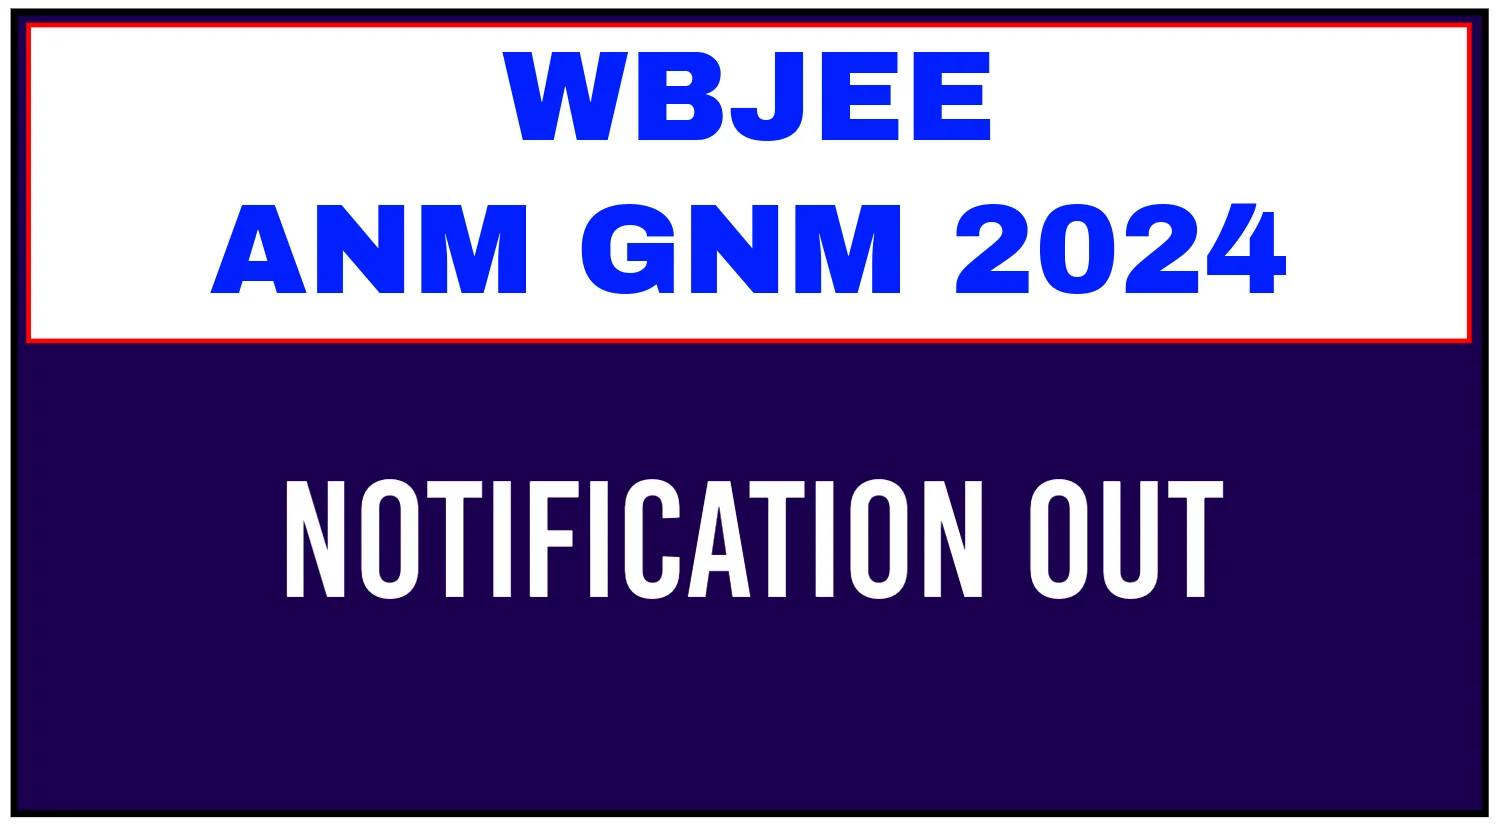 WBJEE ANM GNM Notification 2024 Out